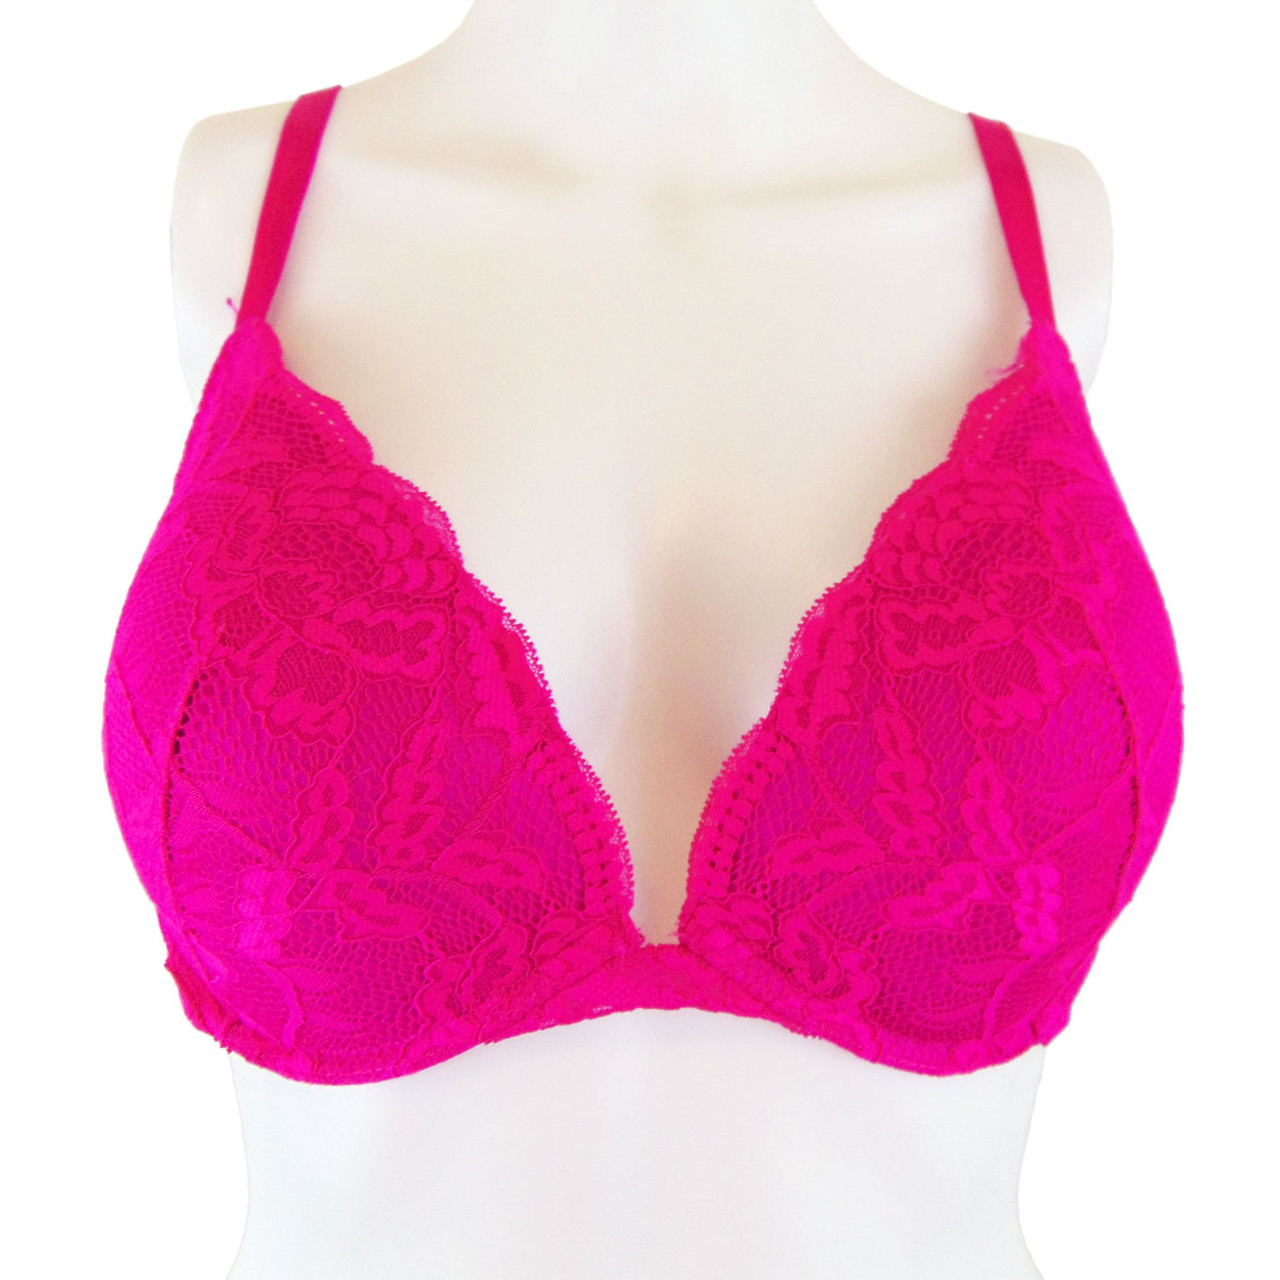 La Senza Sale - See Latest Sales Items & Special Offers